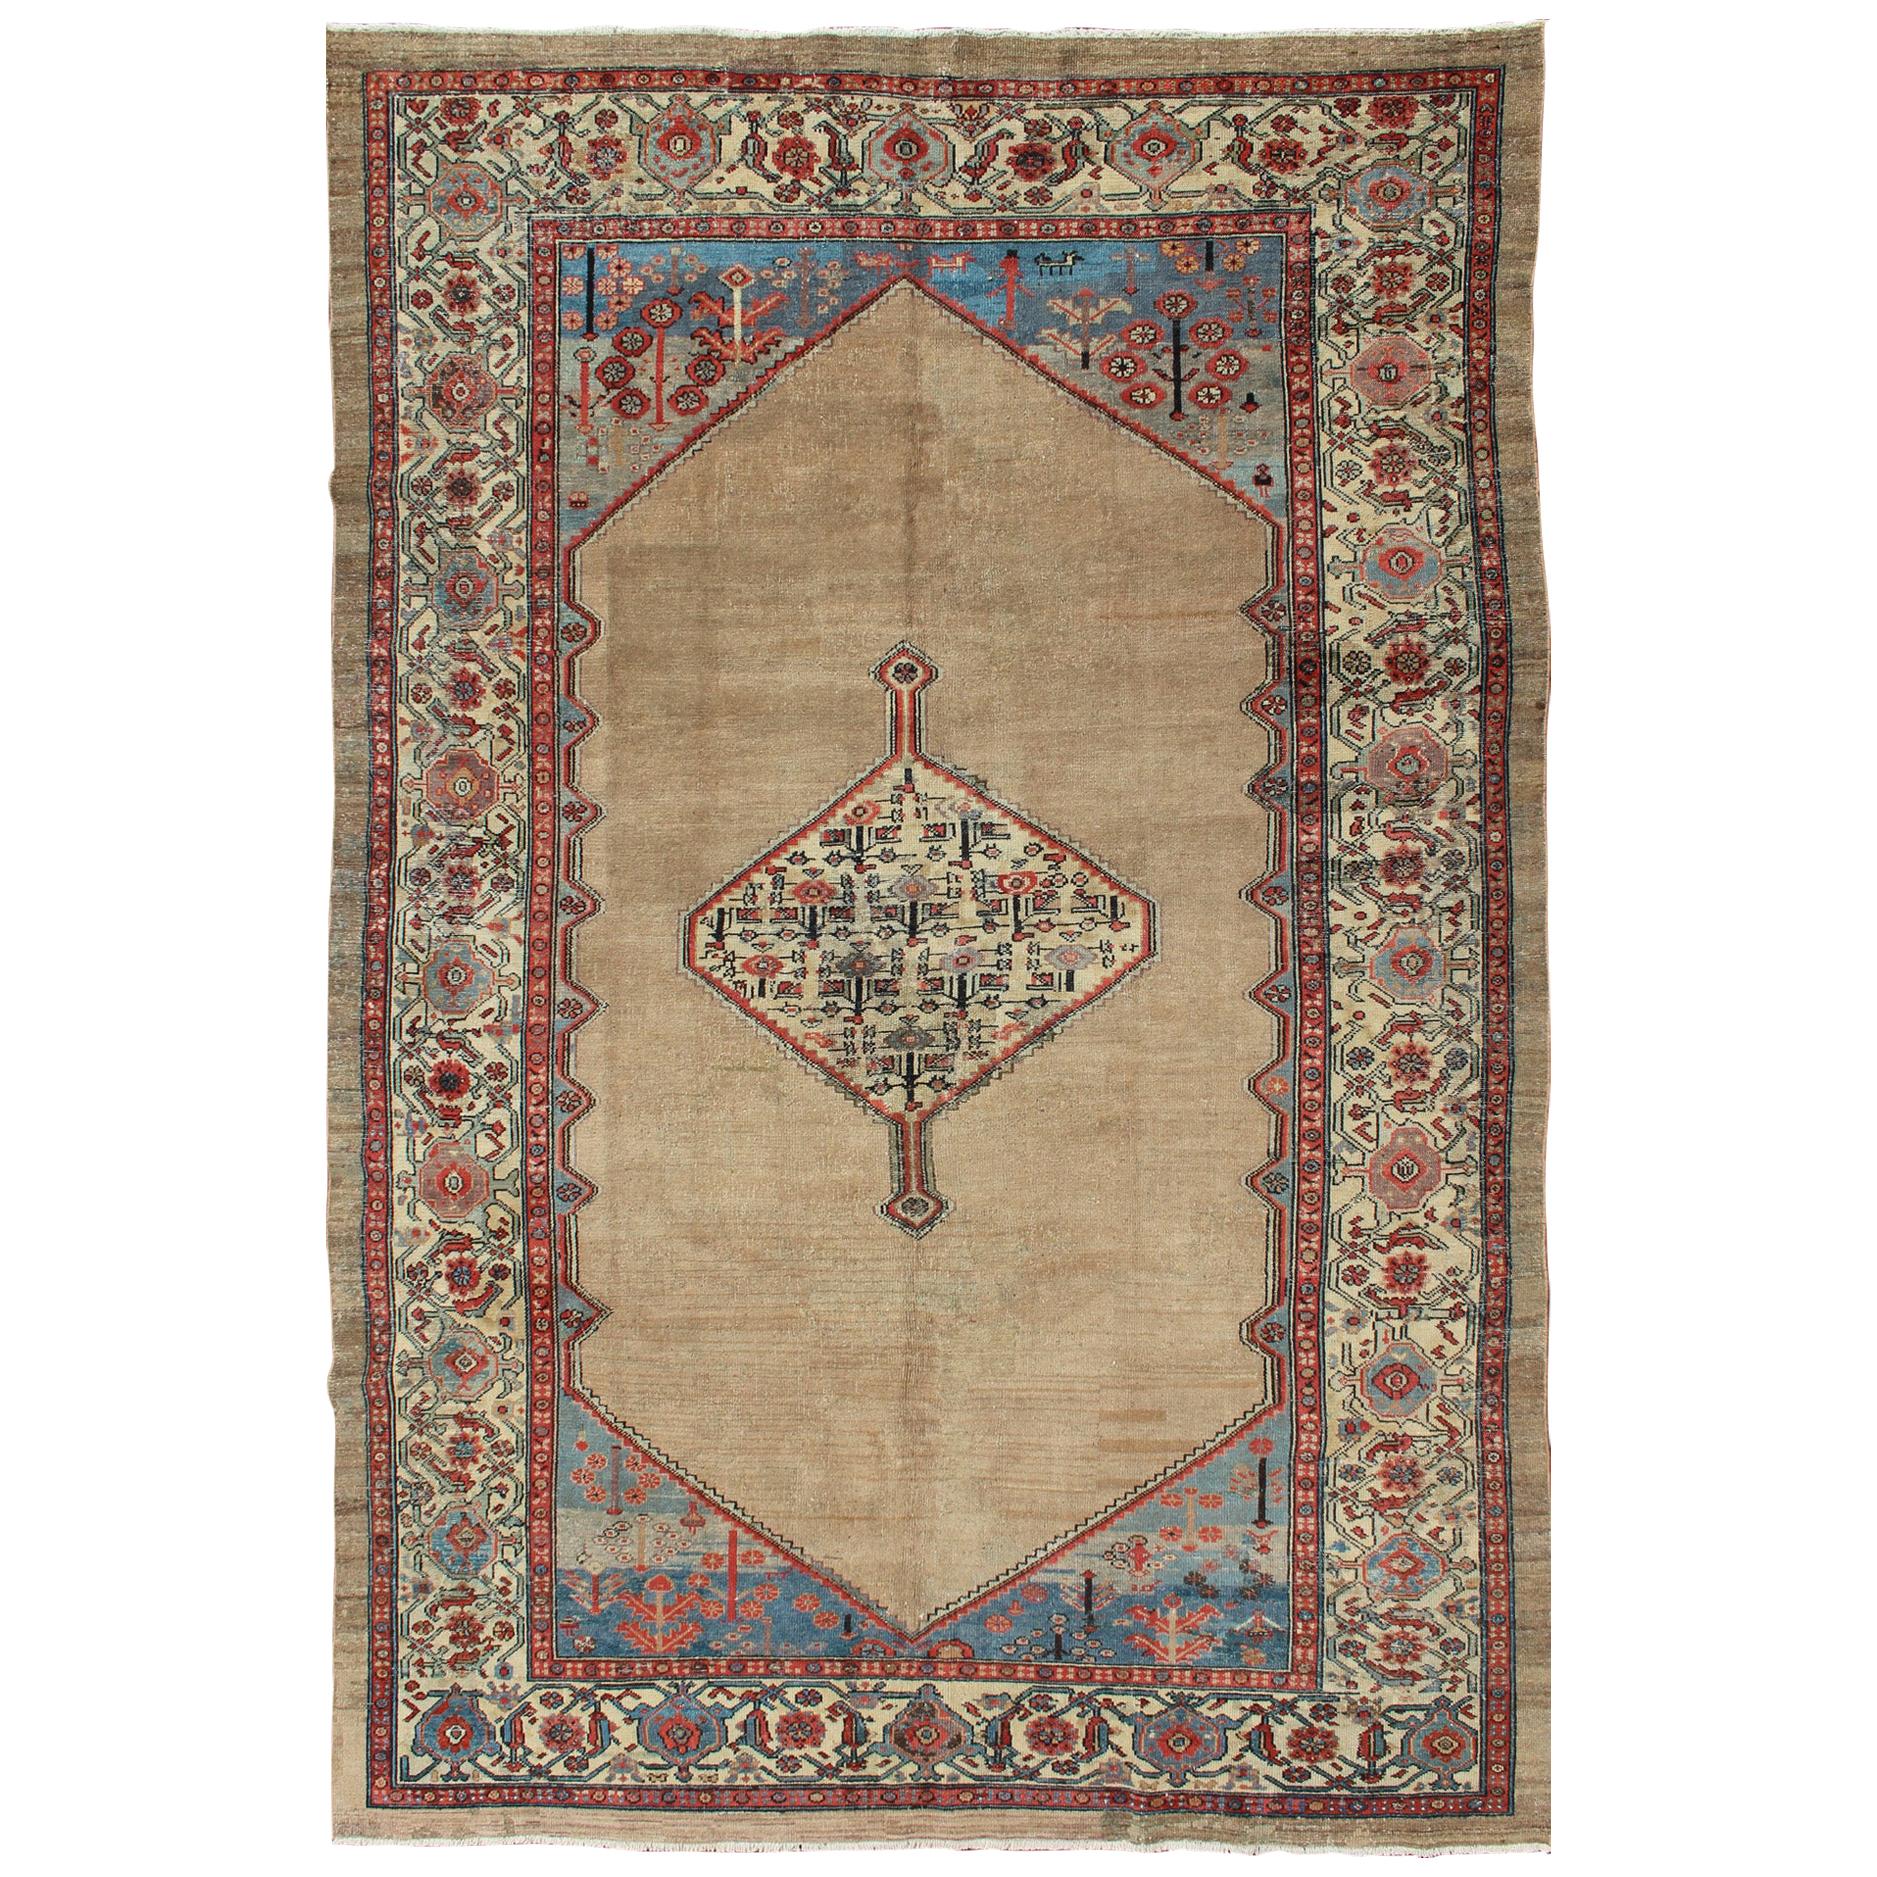 Camel Hair Antique Persian Serab Rug in Camel Color Background, Blue, Salmon  For Sale